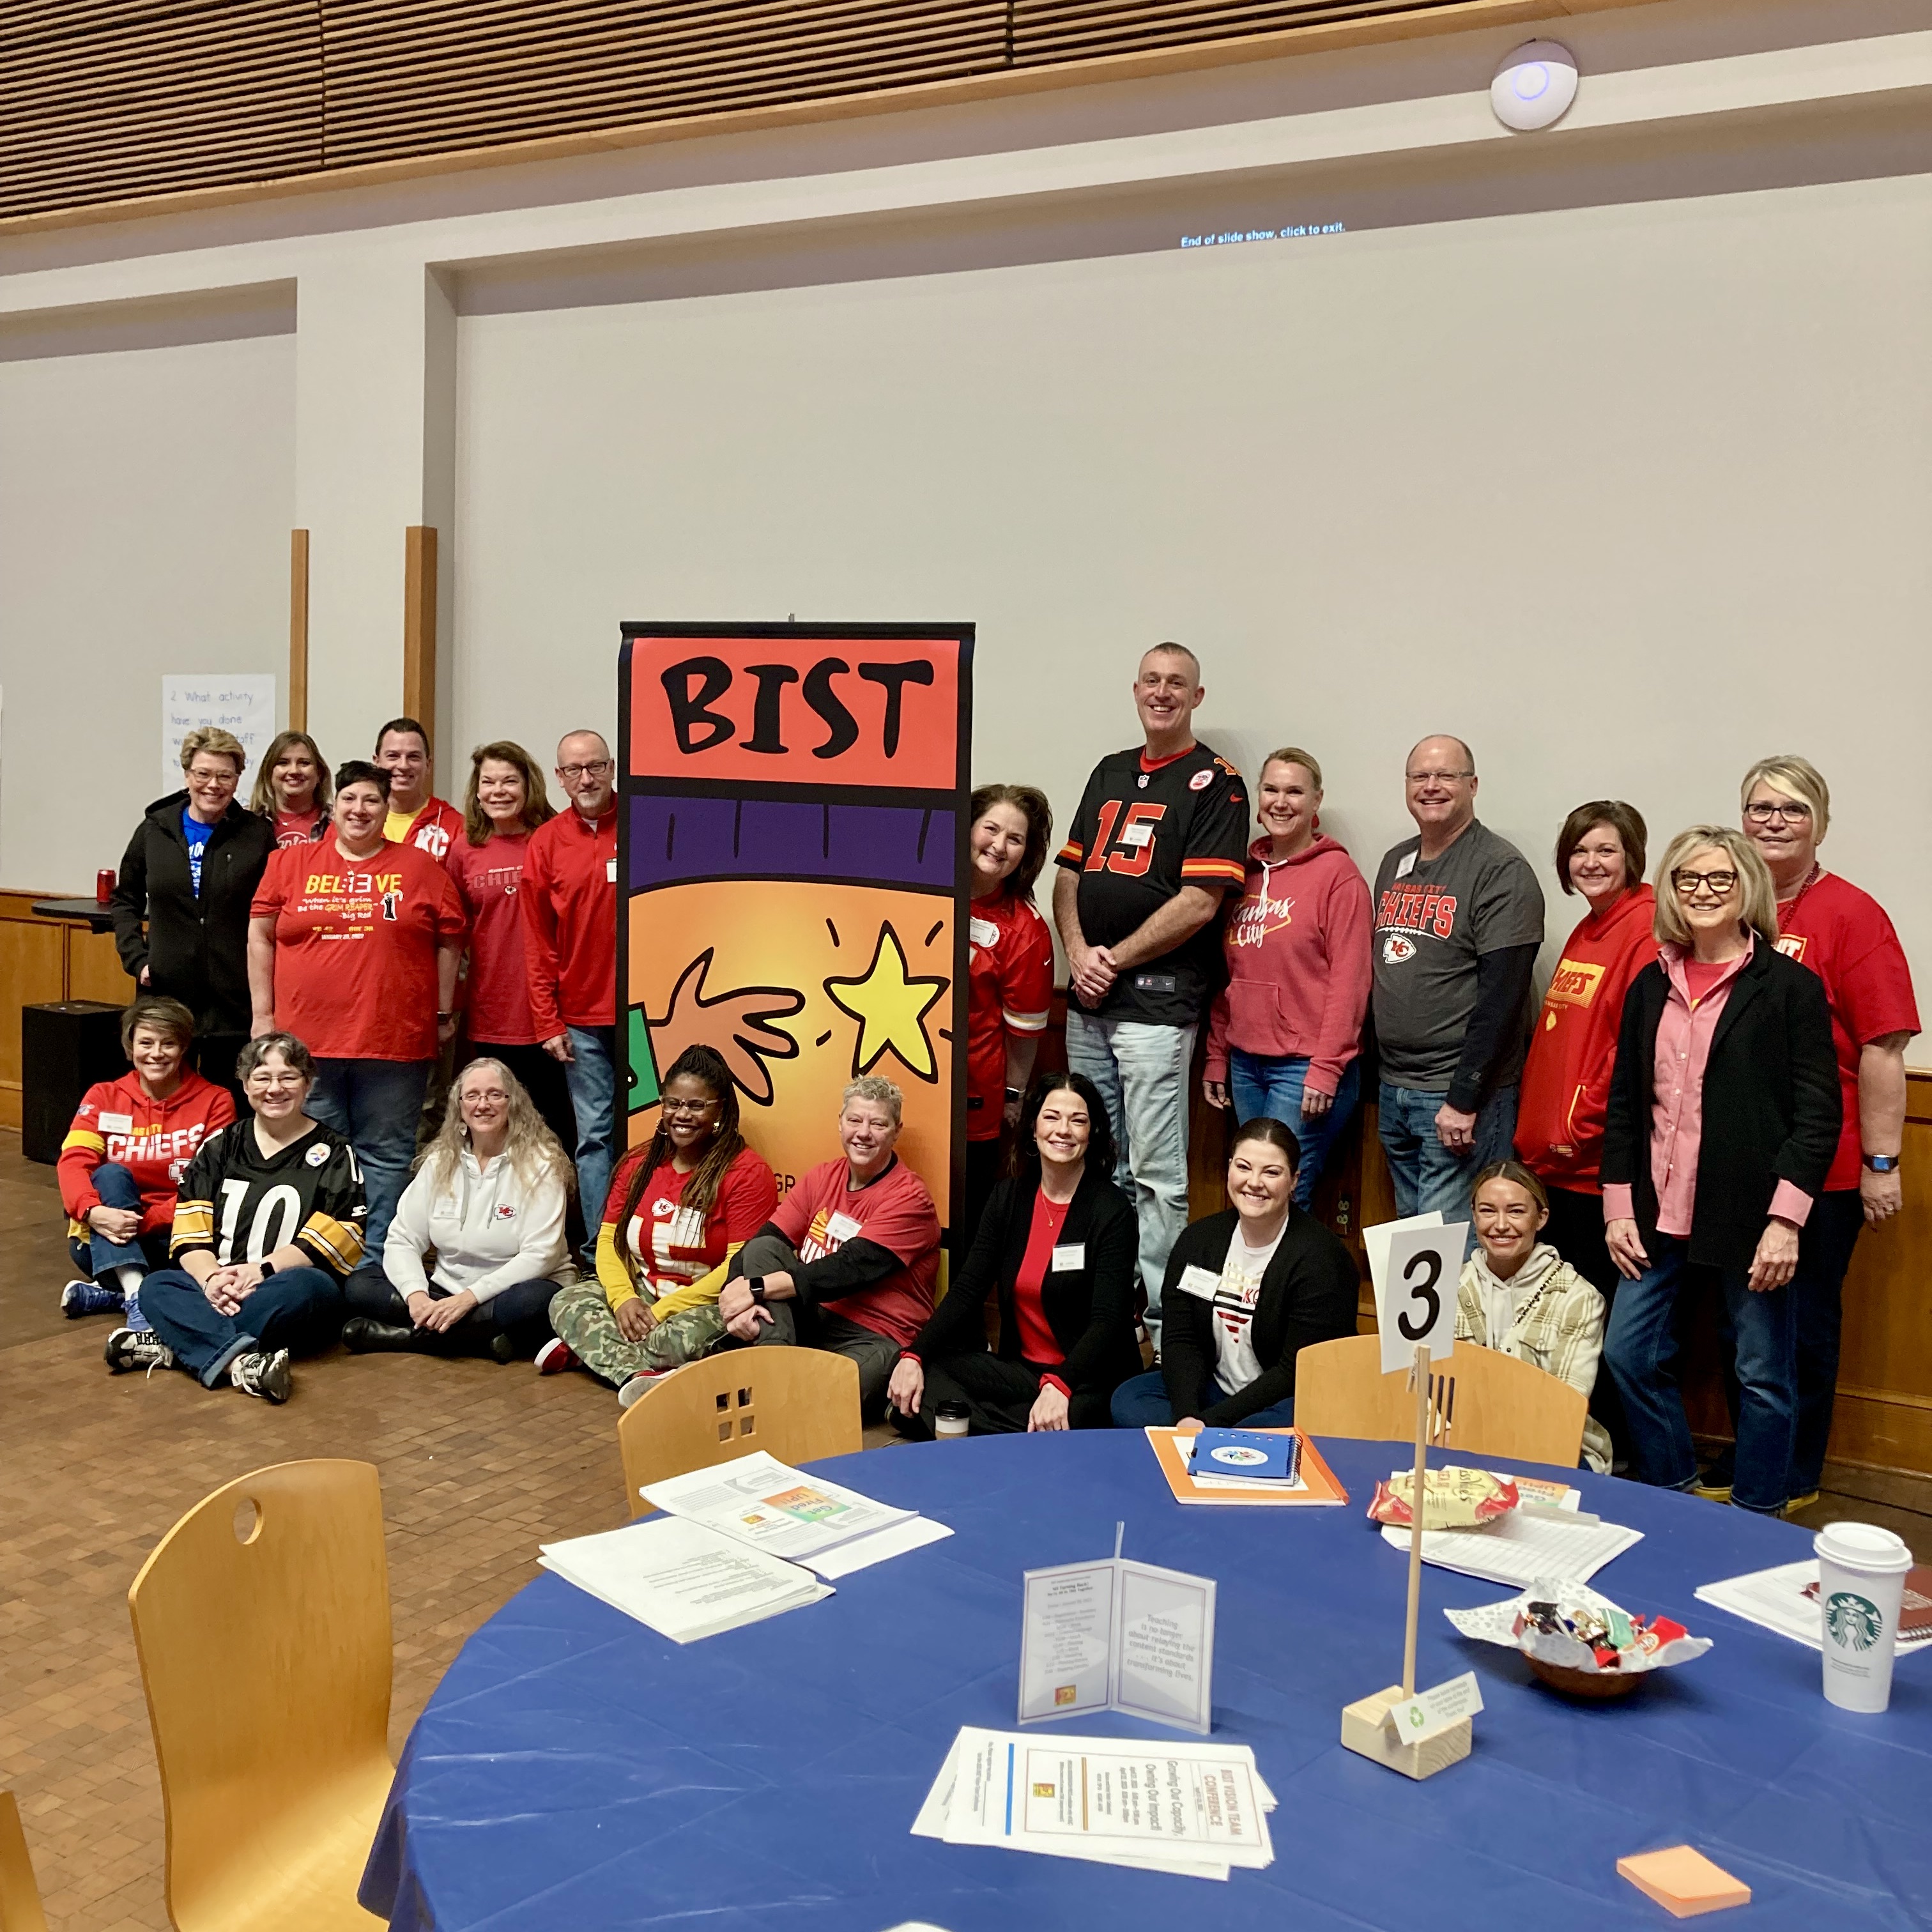 BIST Leadership Conference Offers Hope, Camaraderie, and Vision for School Leaders